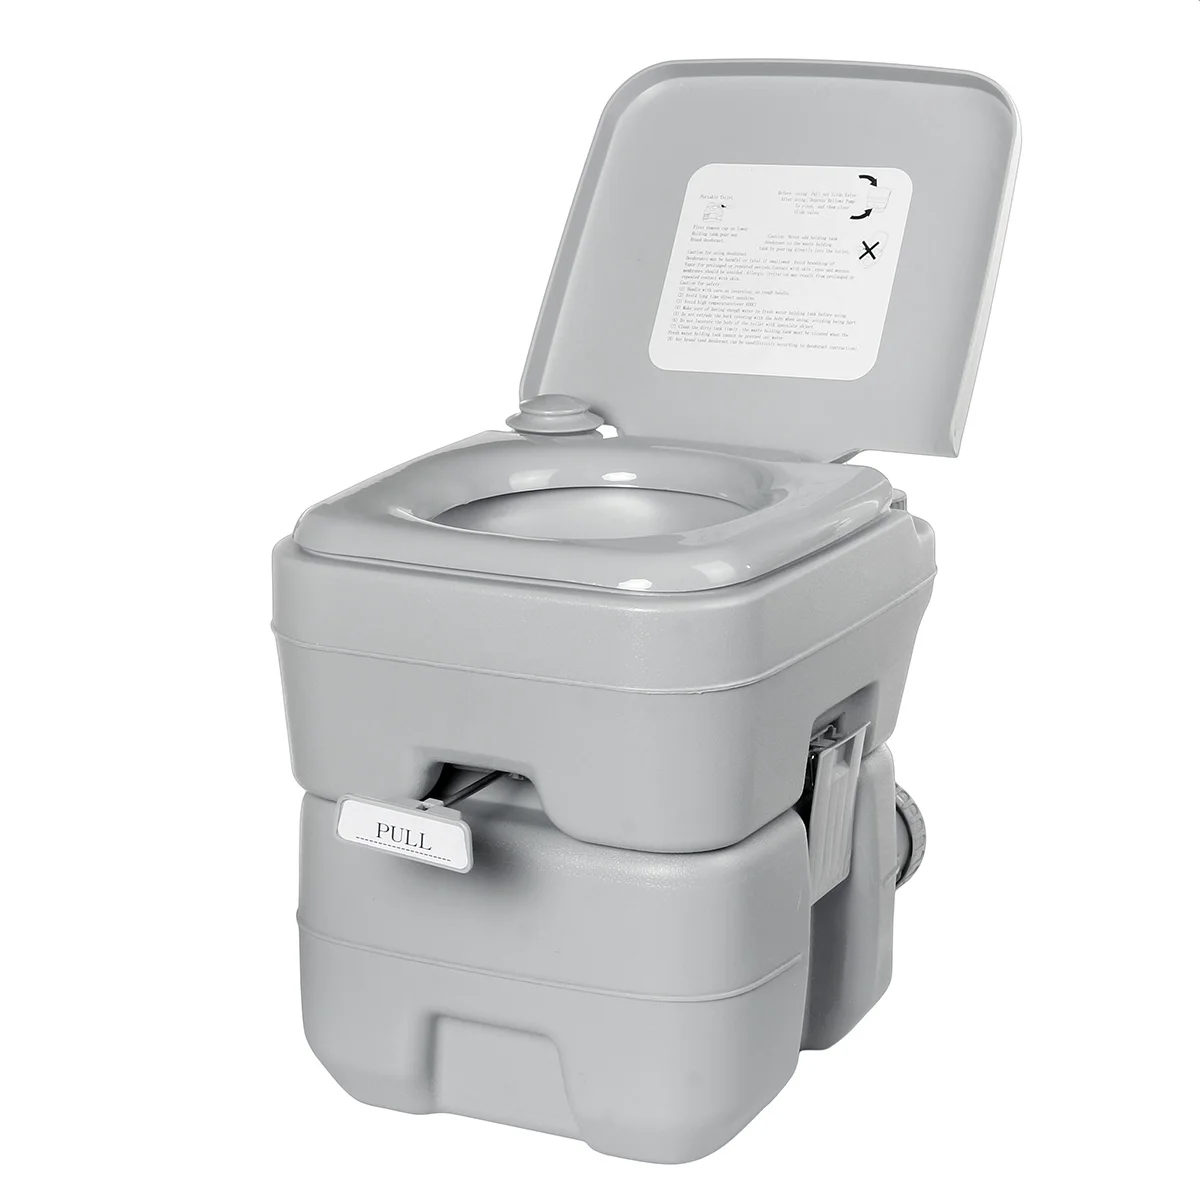 Portable Toilet 24L 6 Gallon Flush Travel Camping Outdoor/Indoor Commode Potty 